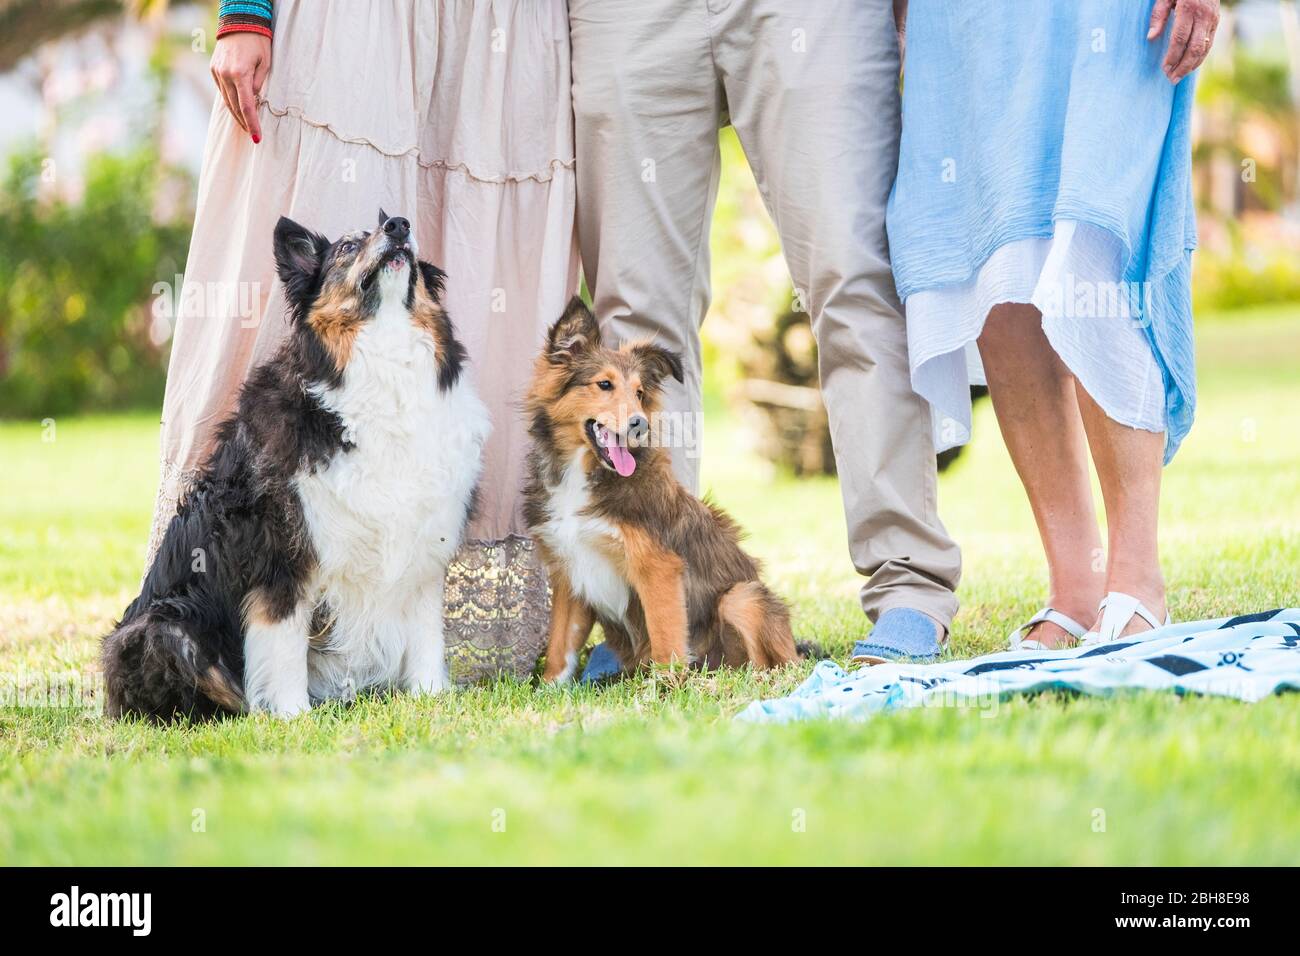 family portraits with people cutted out and focus on two puppy adorable dogs sitting in the meadow - outdoor friends stay together with dogs - friendship with human and animals concept Stock Photo